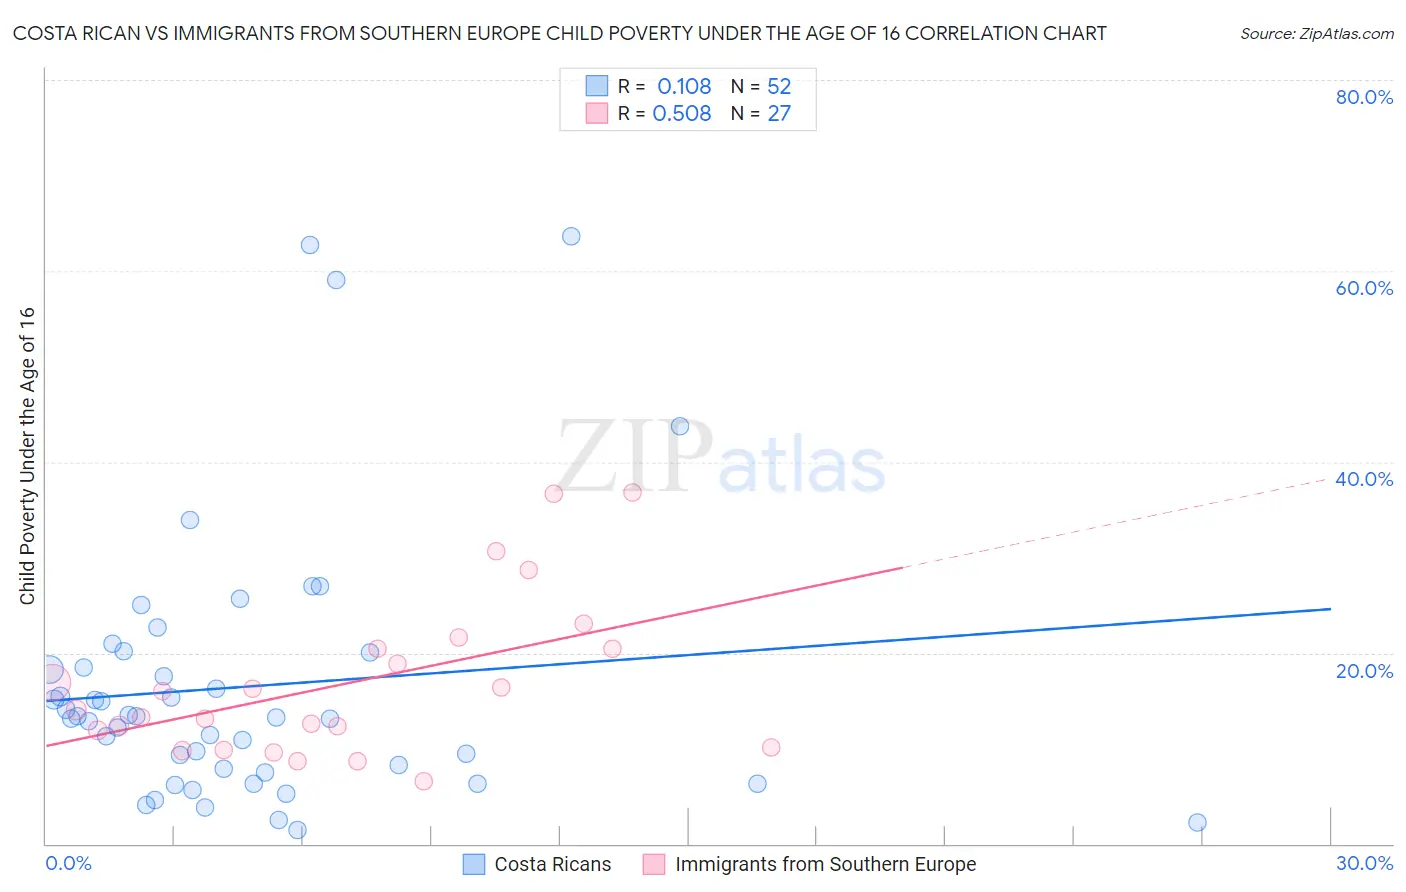 Costa Rican vs Immigrants from Southern Europe Child Poverty Under the Age of 16